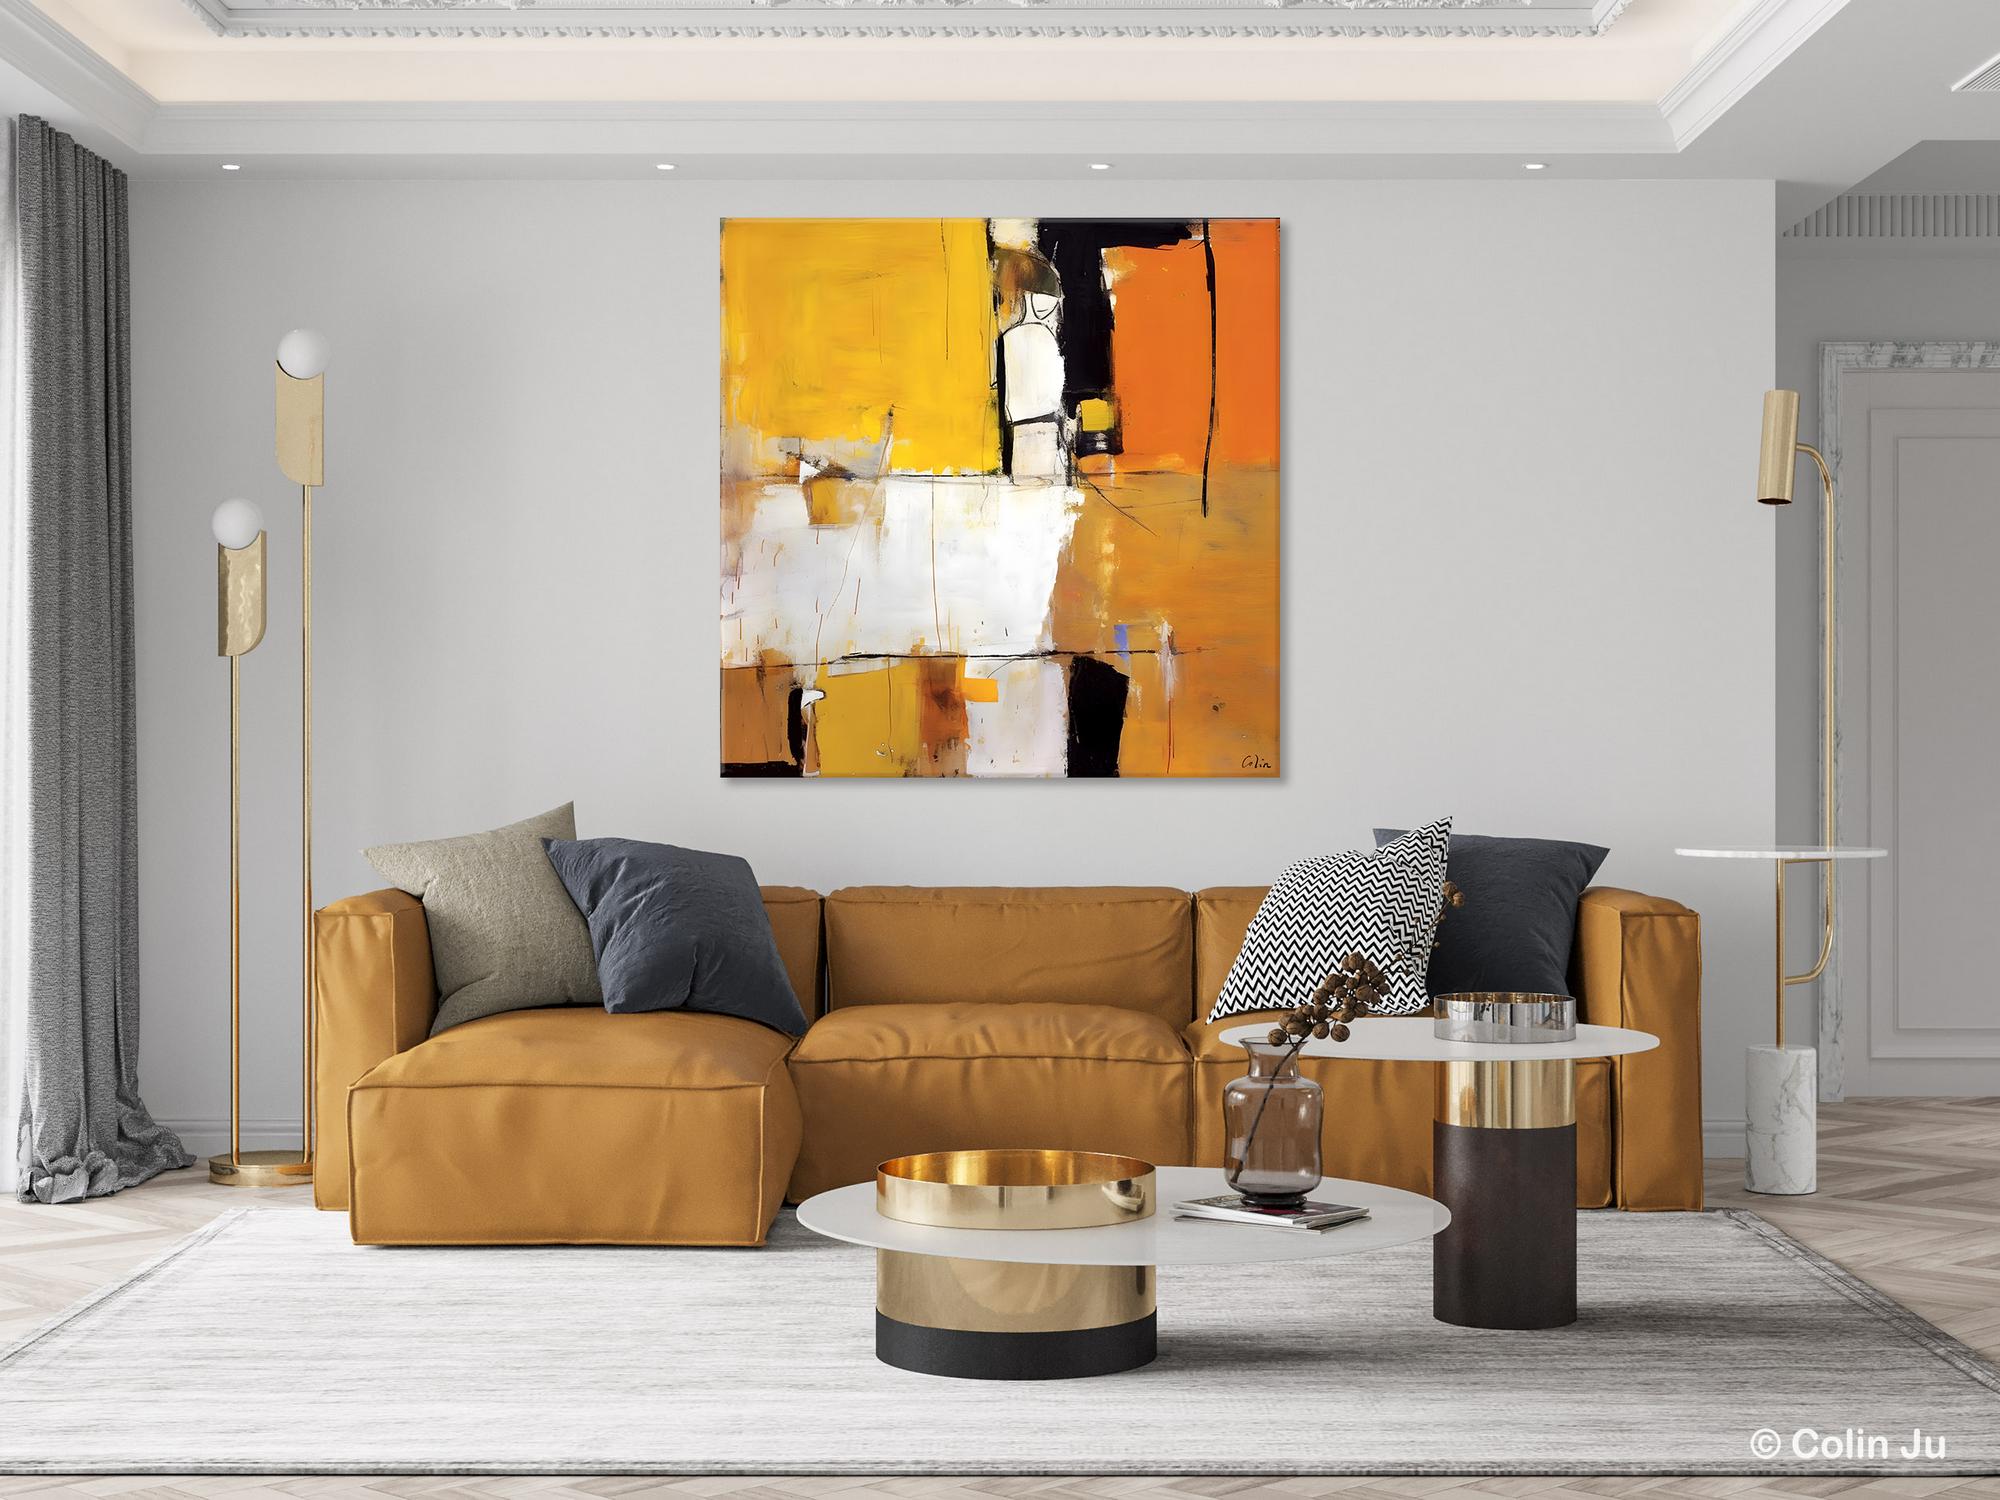 Oversized Modern Abstract Wall Paintings, Large Wall Art Painting for Bedroom, Original Canvas Art, Contemporary Acrylic Painting on Canvas-artworkcanvas